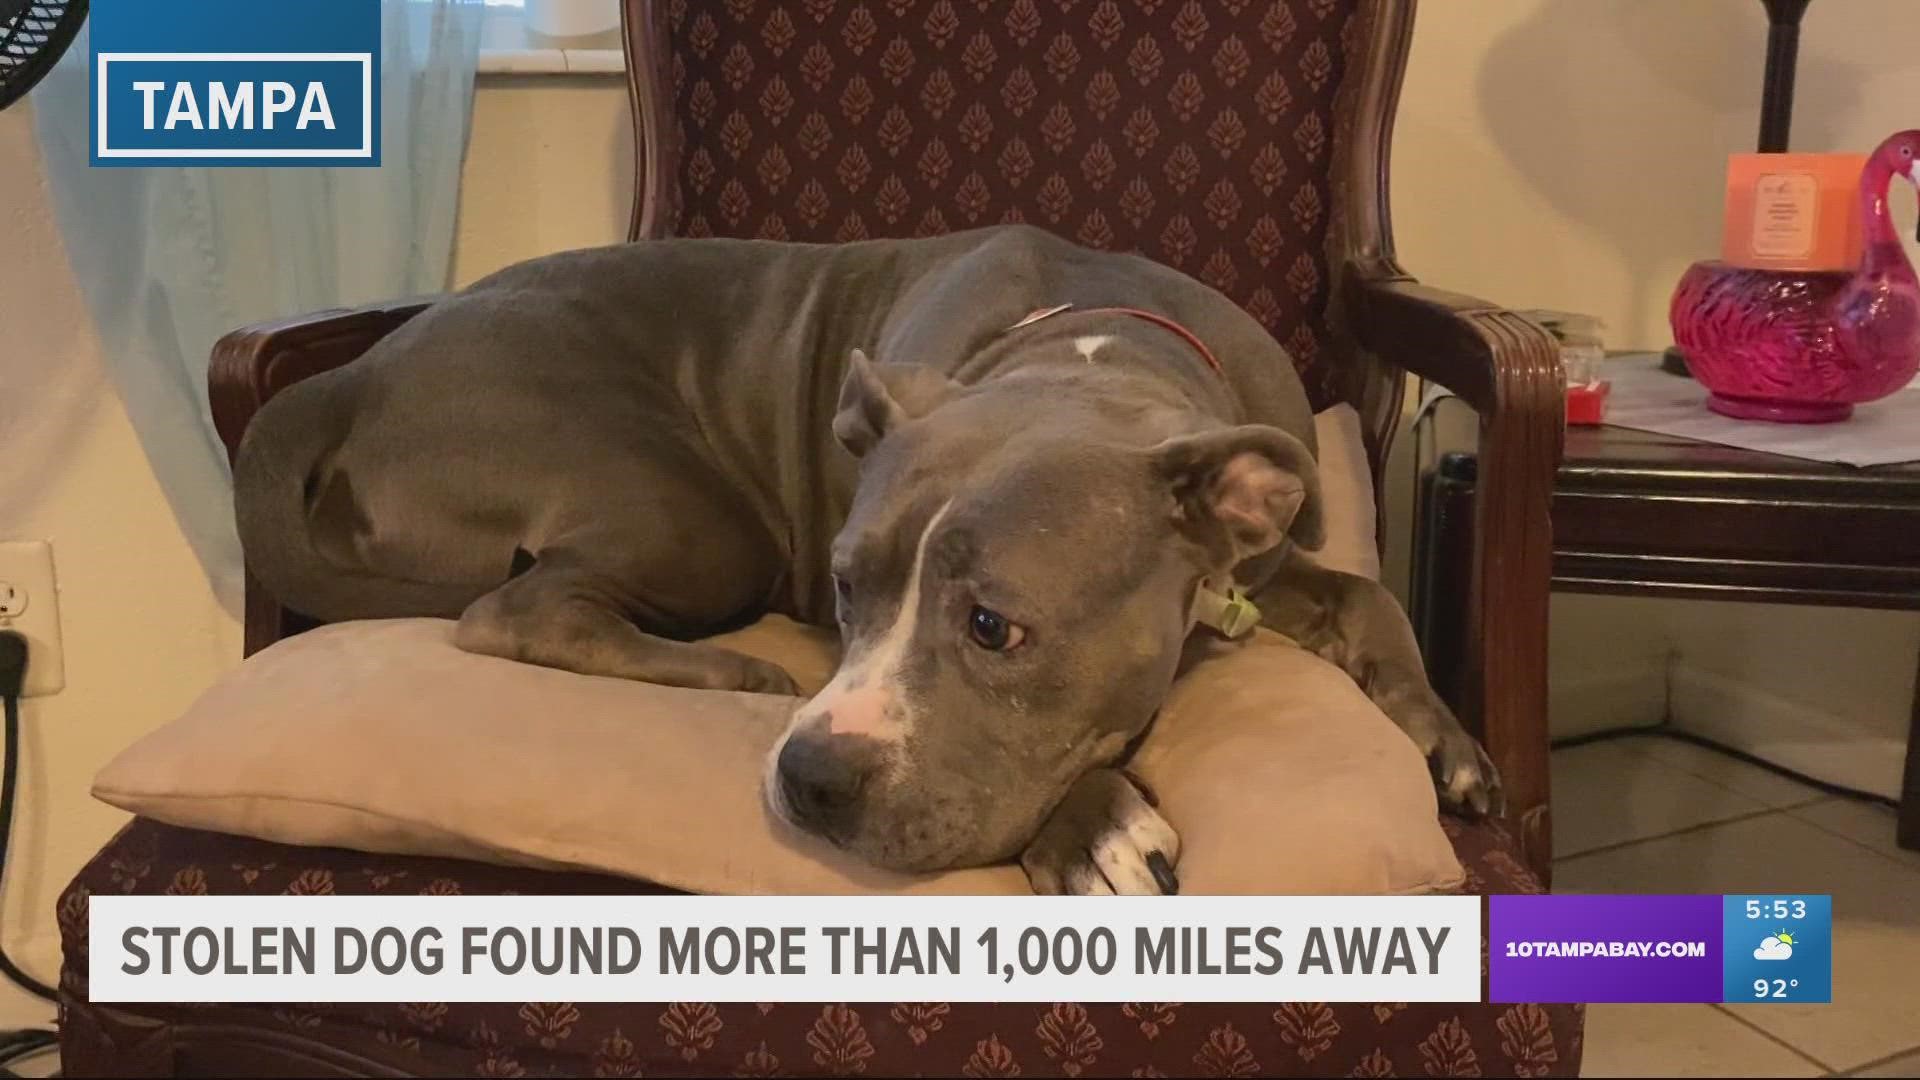 A Tampa couple found their stolen pup more than 1,000 miles away.